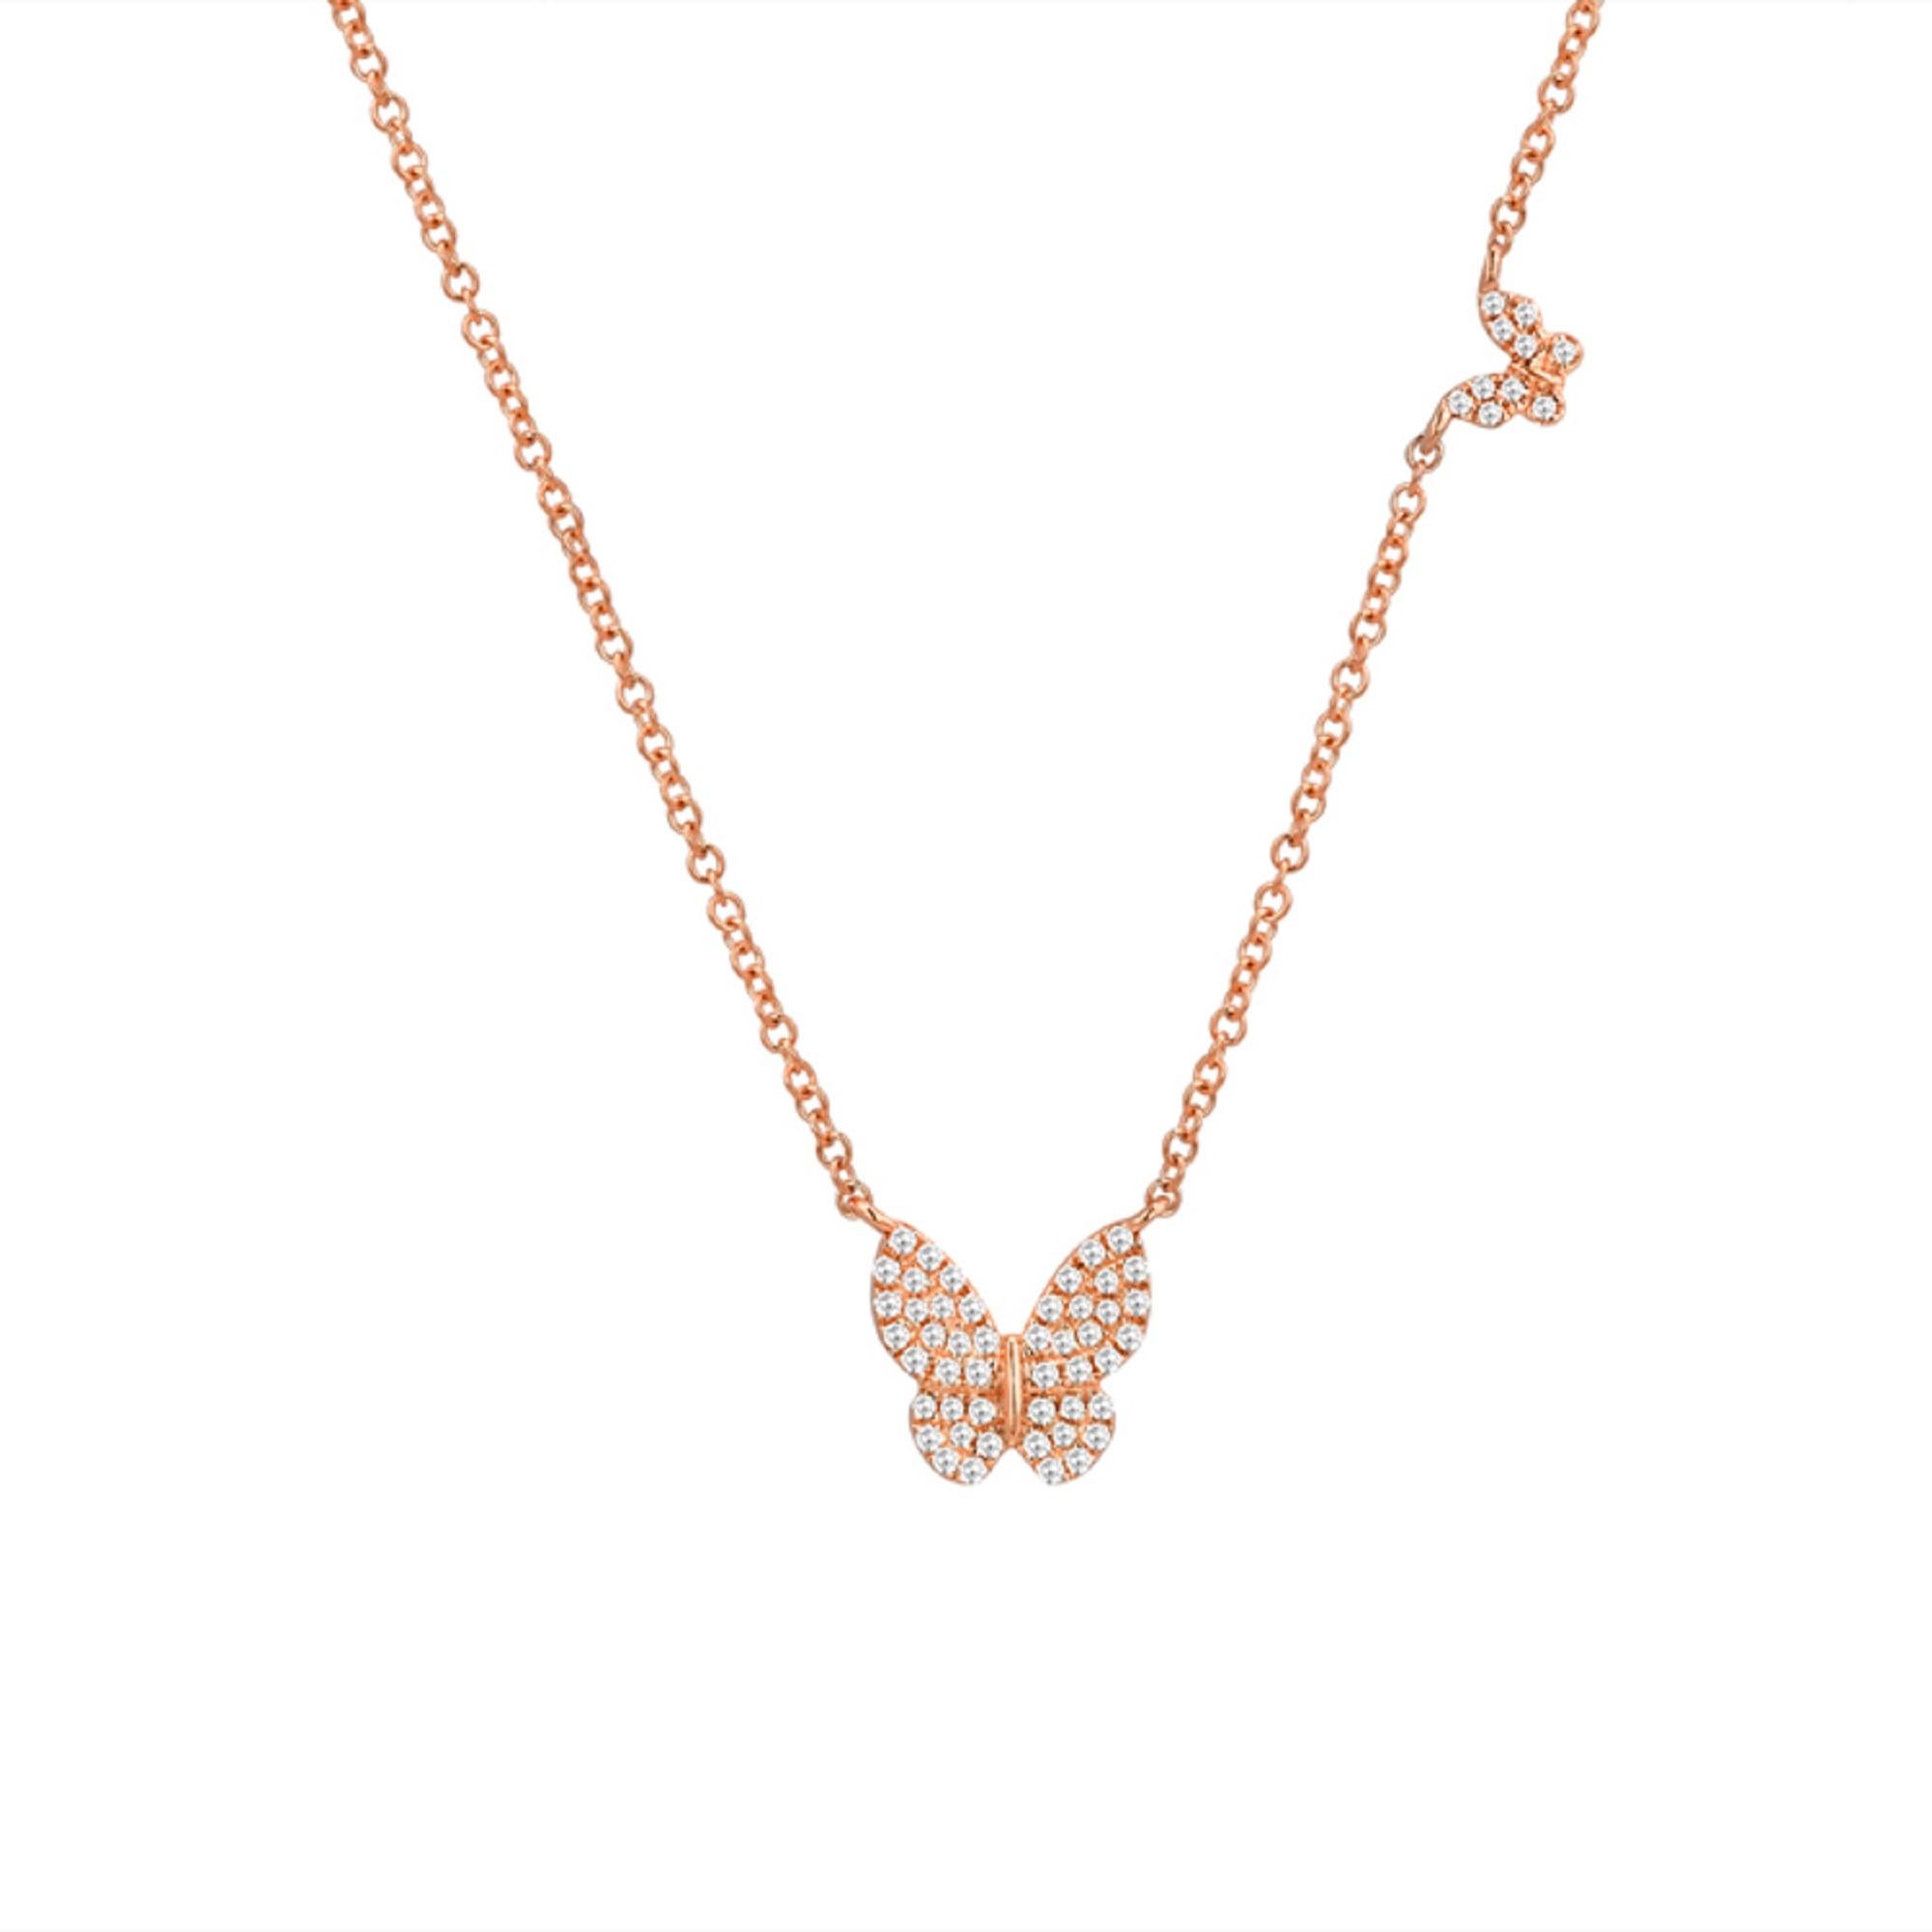 This Beautiful 2 Butterfly Diamond Necklace is perfect for your Summer wardrobe! Crafted of 14K Rose Gold featuring 0.19 ct. of Round White Diamonds on an adjustable 16